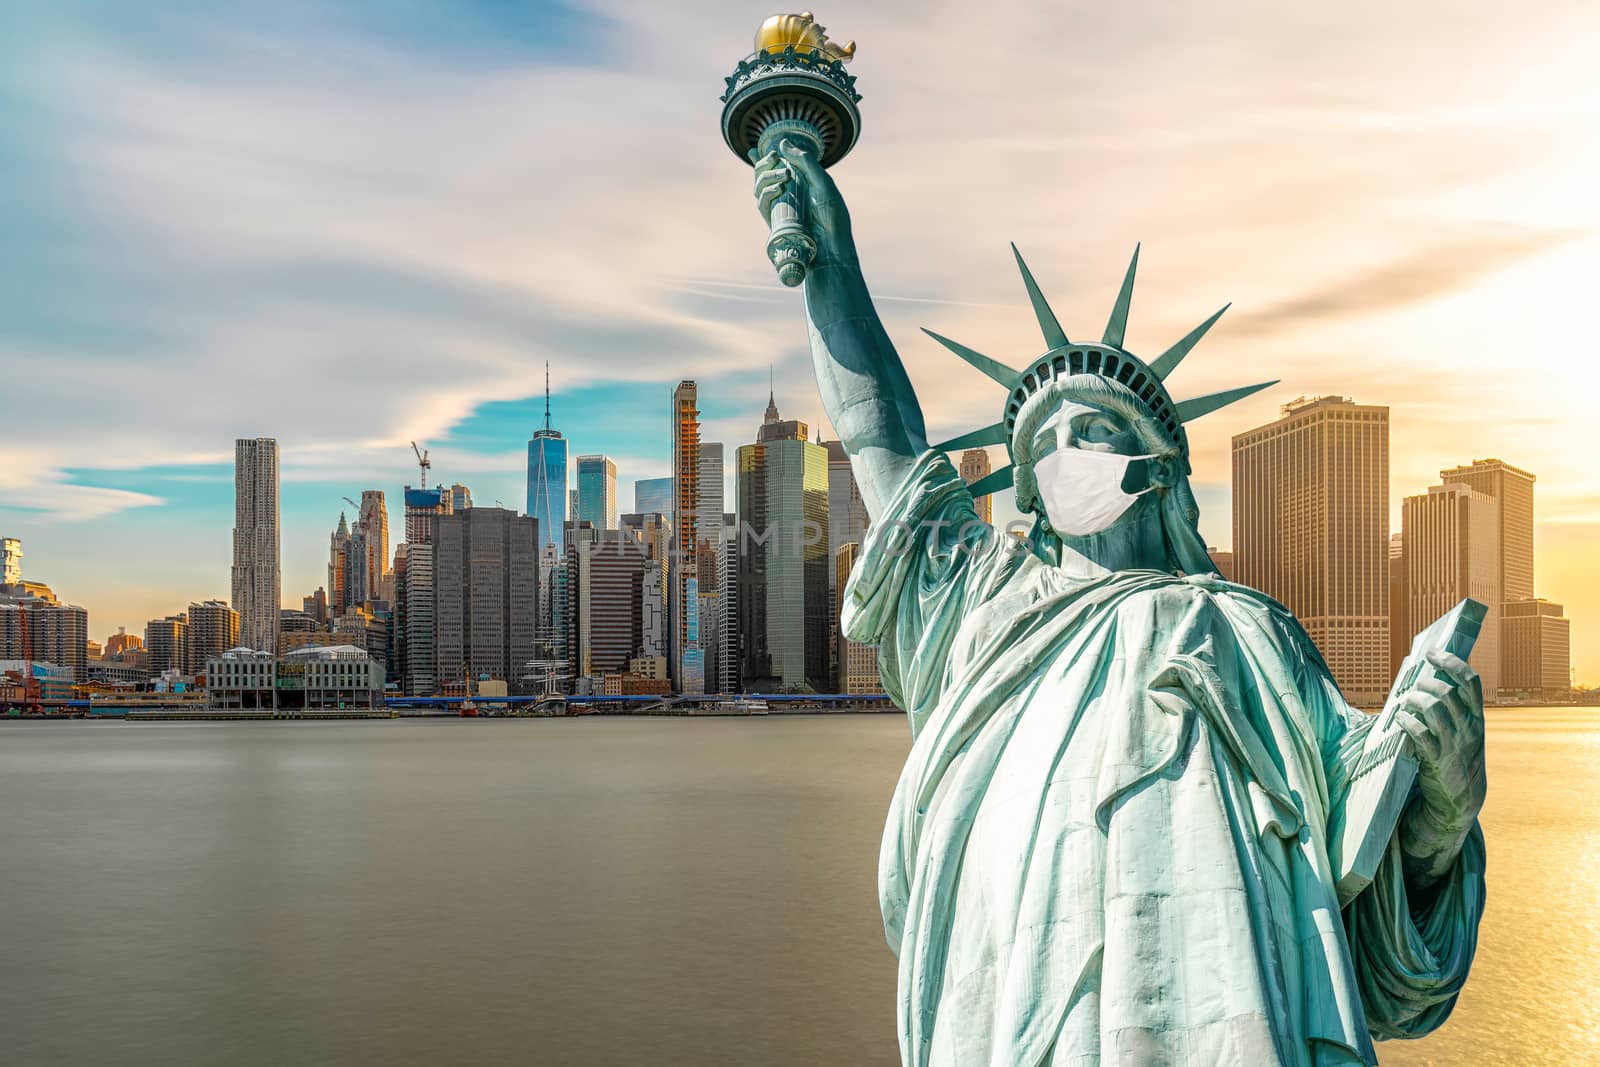 The Statue of Liberty wearing surgical mask when Covid-19 Outbreak over the Scene of New york cityscape river side, united state, coronavirus pandemic, Architecture and building with tourist concept